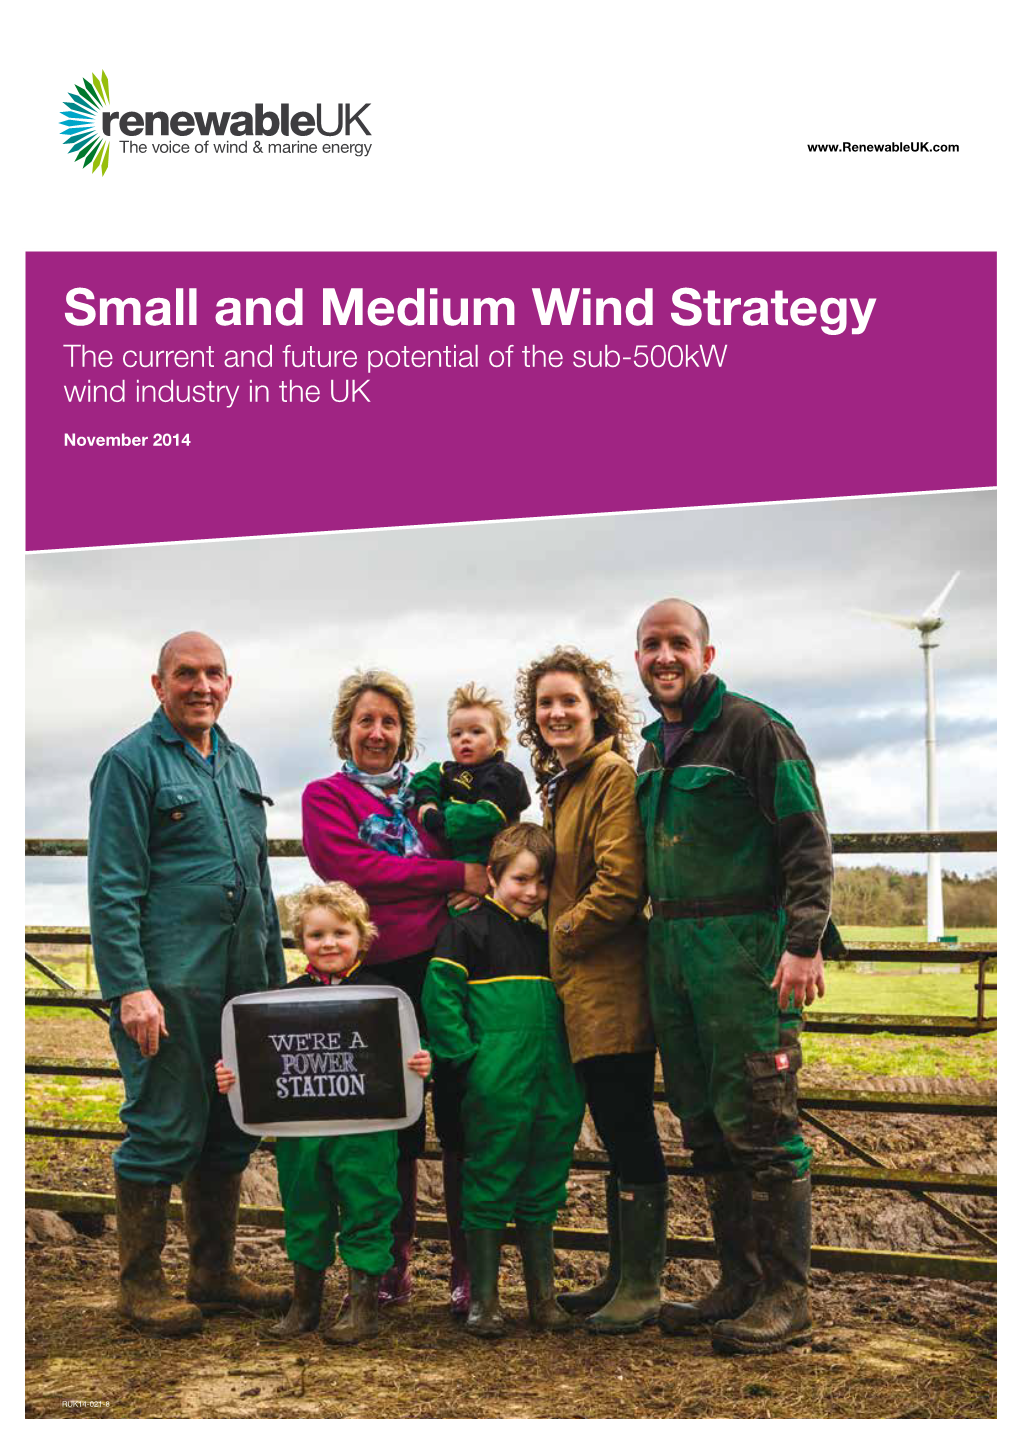 Small and Medium Wind Strategy the Current and Future Potential of the Sub-500Kw Wind Industry in the UK